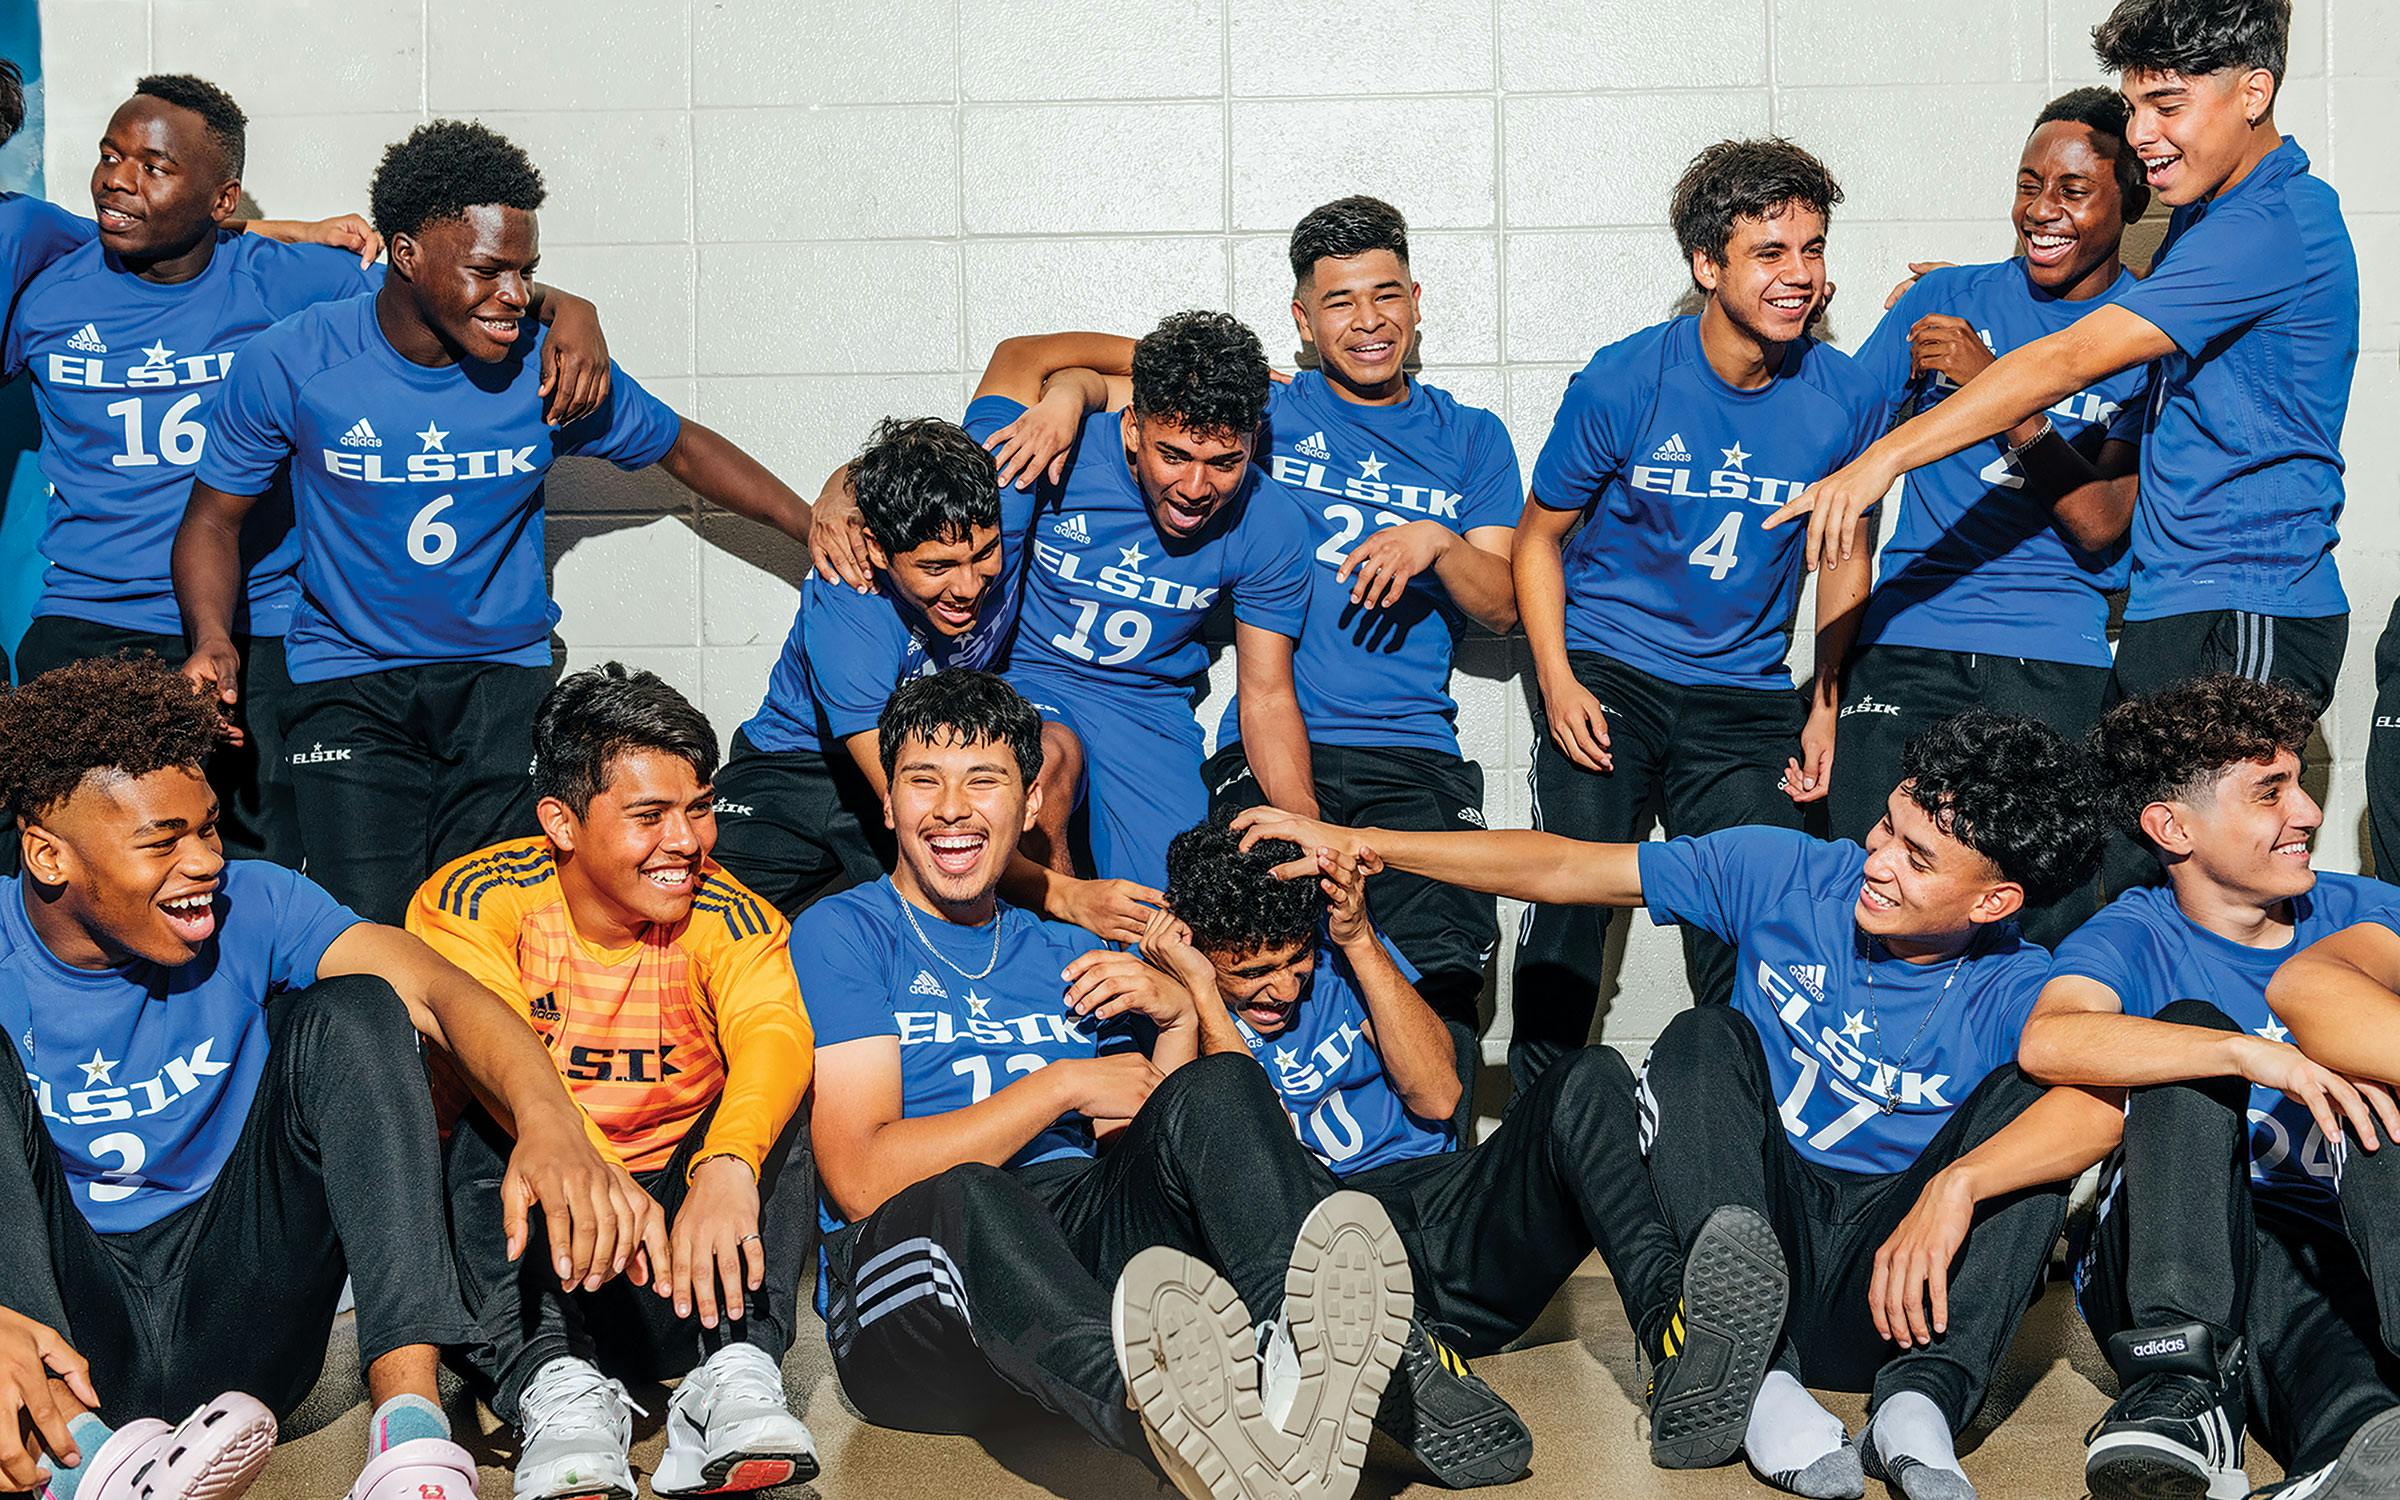 https://img.texasmonthly.com/2022/04/ALIEF-elsik-soccer-team.jpg?auto=compress&crop=faces&fit=fit&fm=pjpg&ixlib=php-3.3.1&q=45